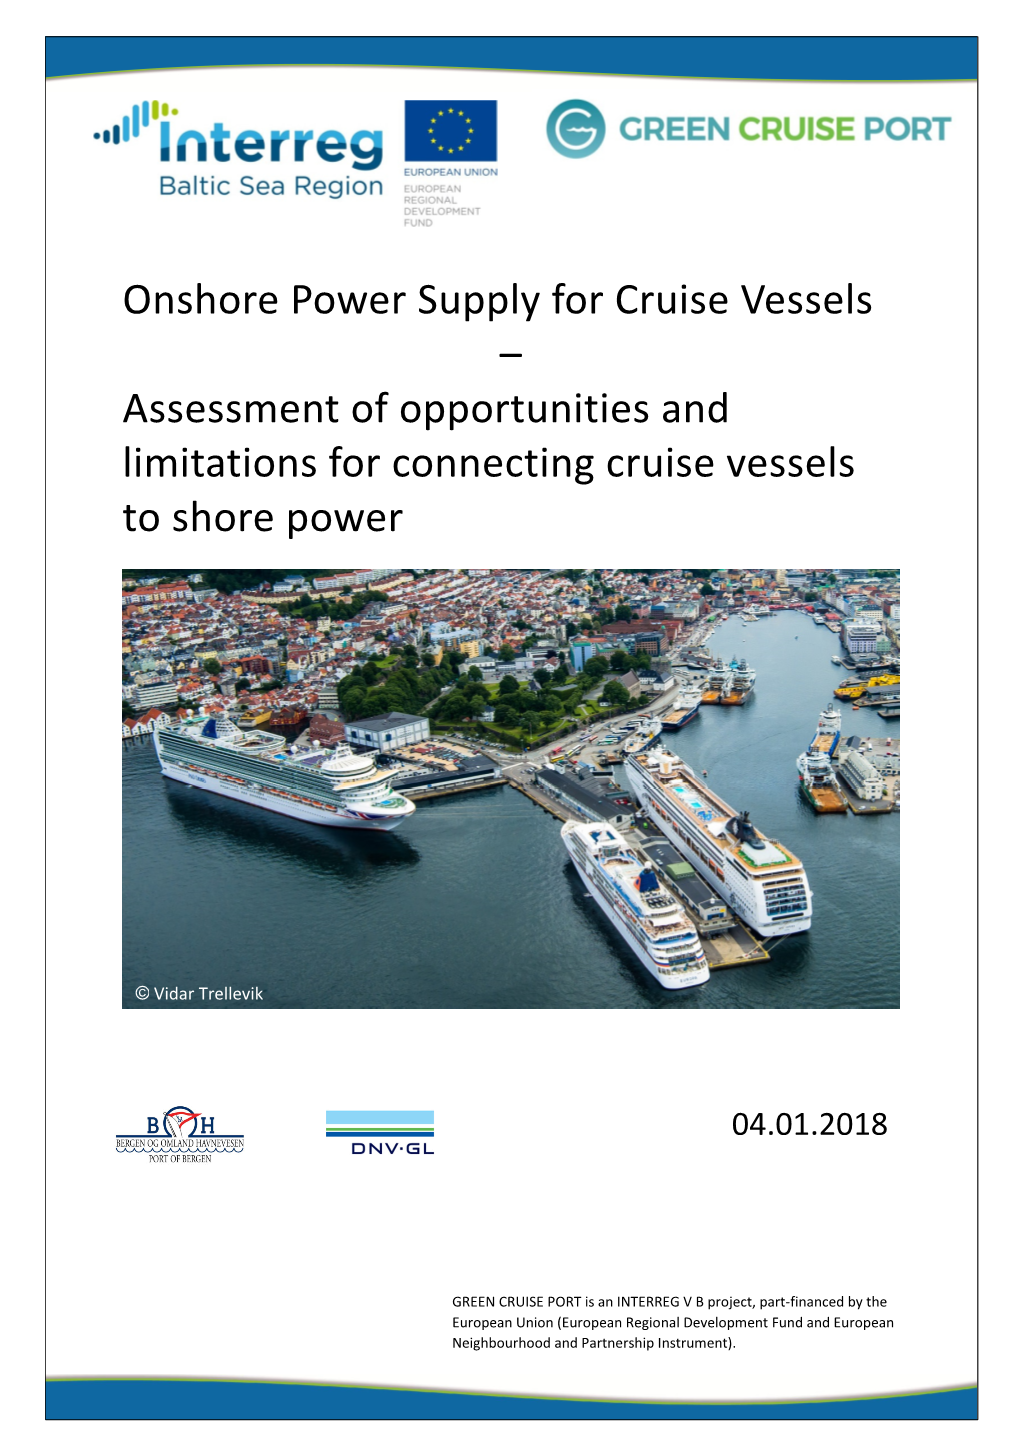 Onshore Power Supply for Cruise Vessels – Assessment of Opportunities and Limitations for Connecting Cruise Vessels to Shore Power